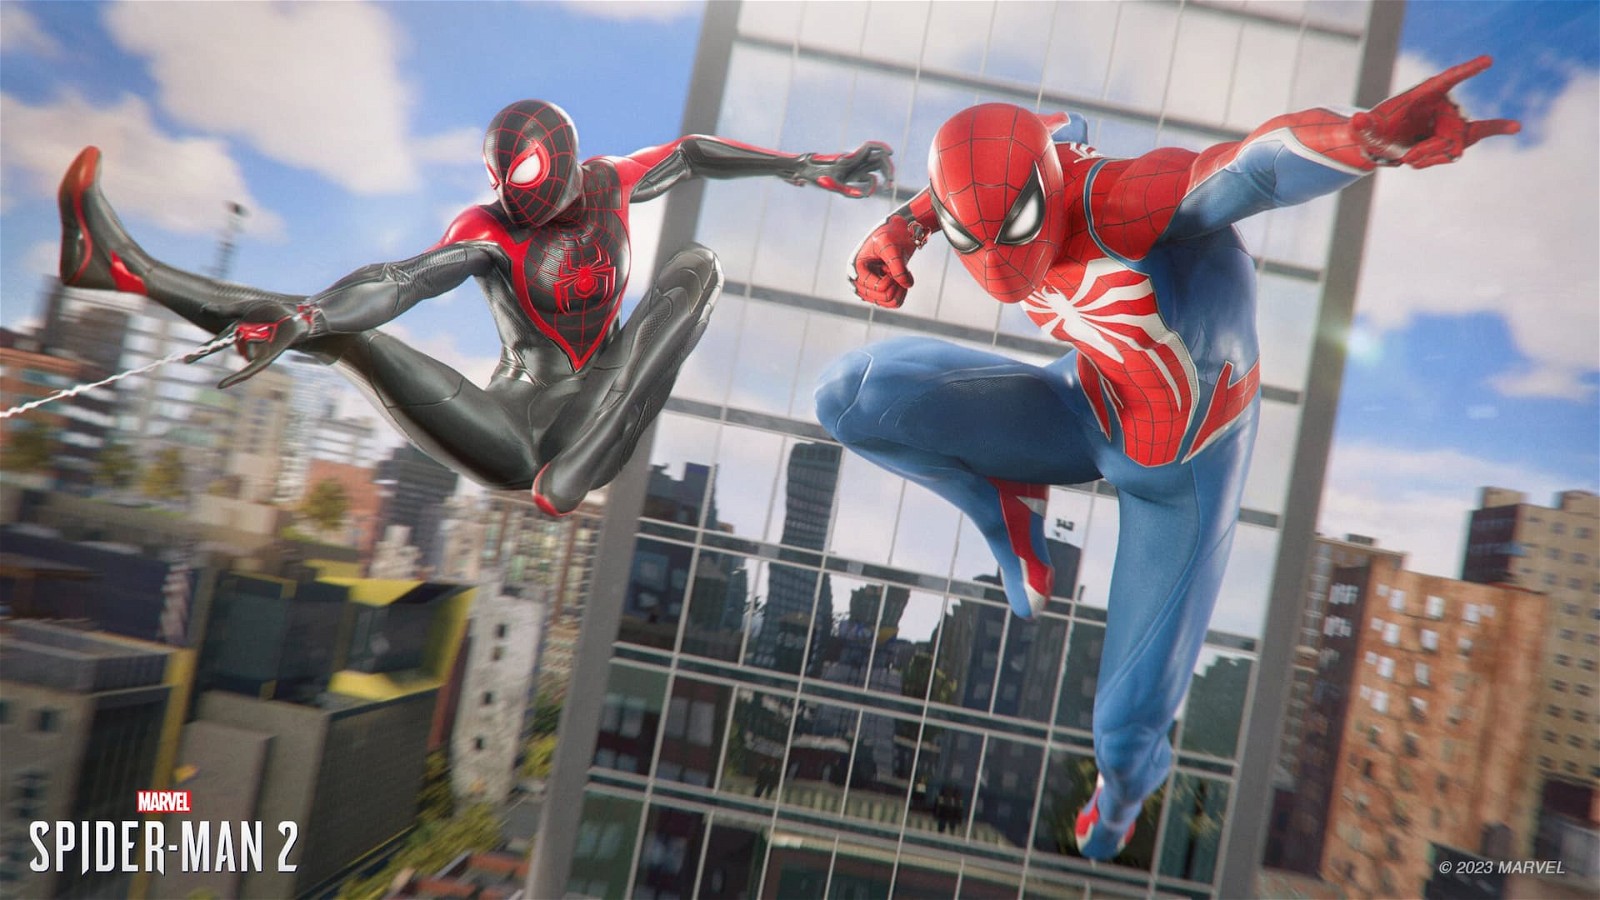 The leaked Marvel's Spider-Man 2 trailer shows Miles and Peter up against Venom